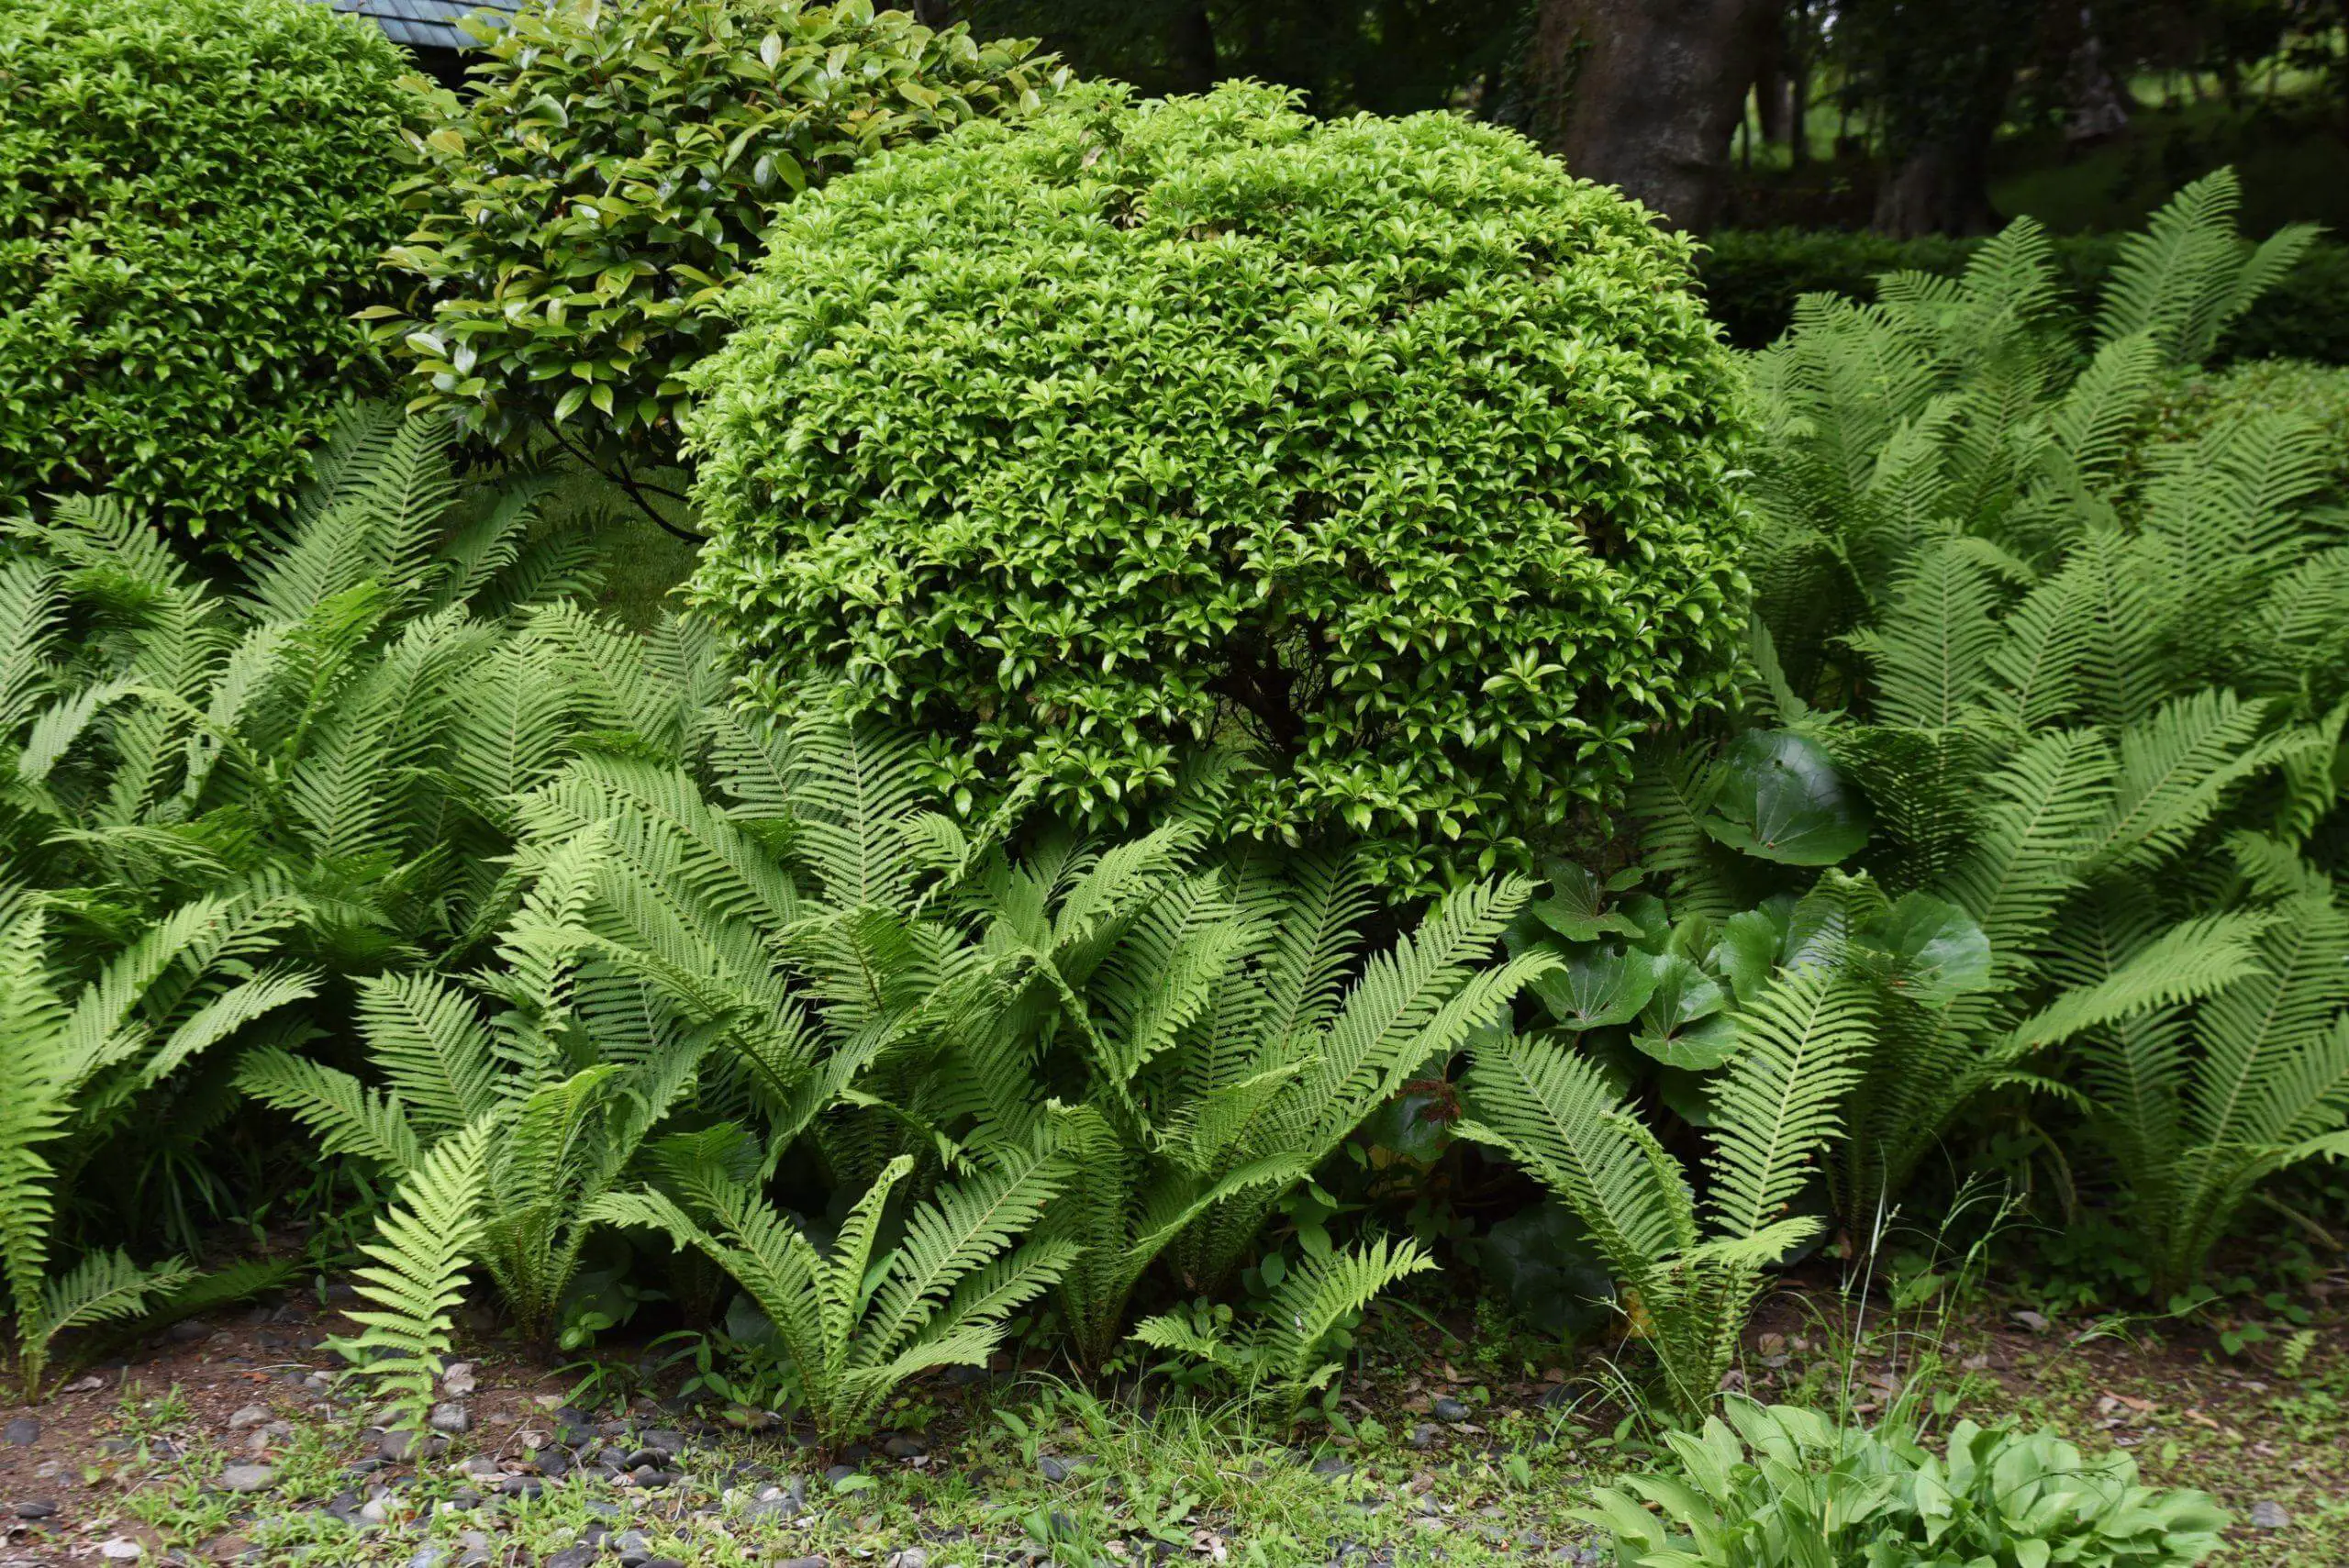 Ostrich ferns growing comfortably within a garden